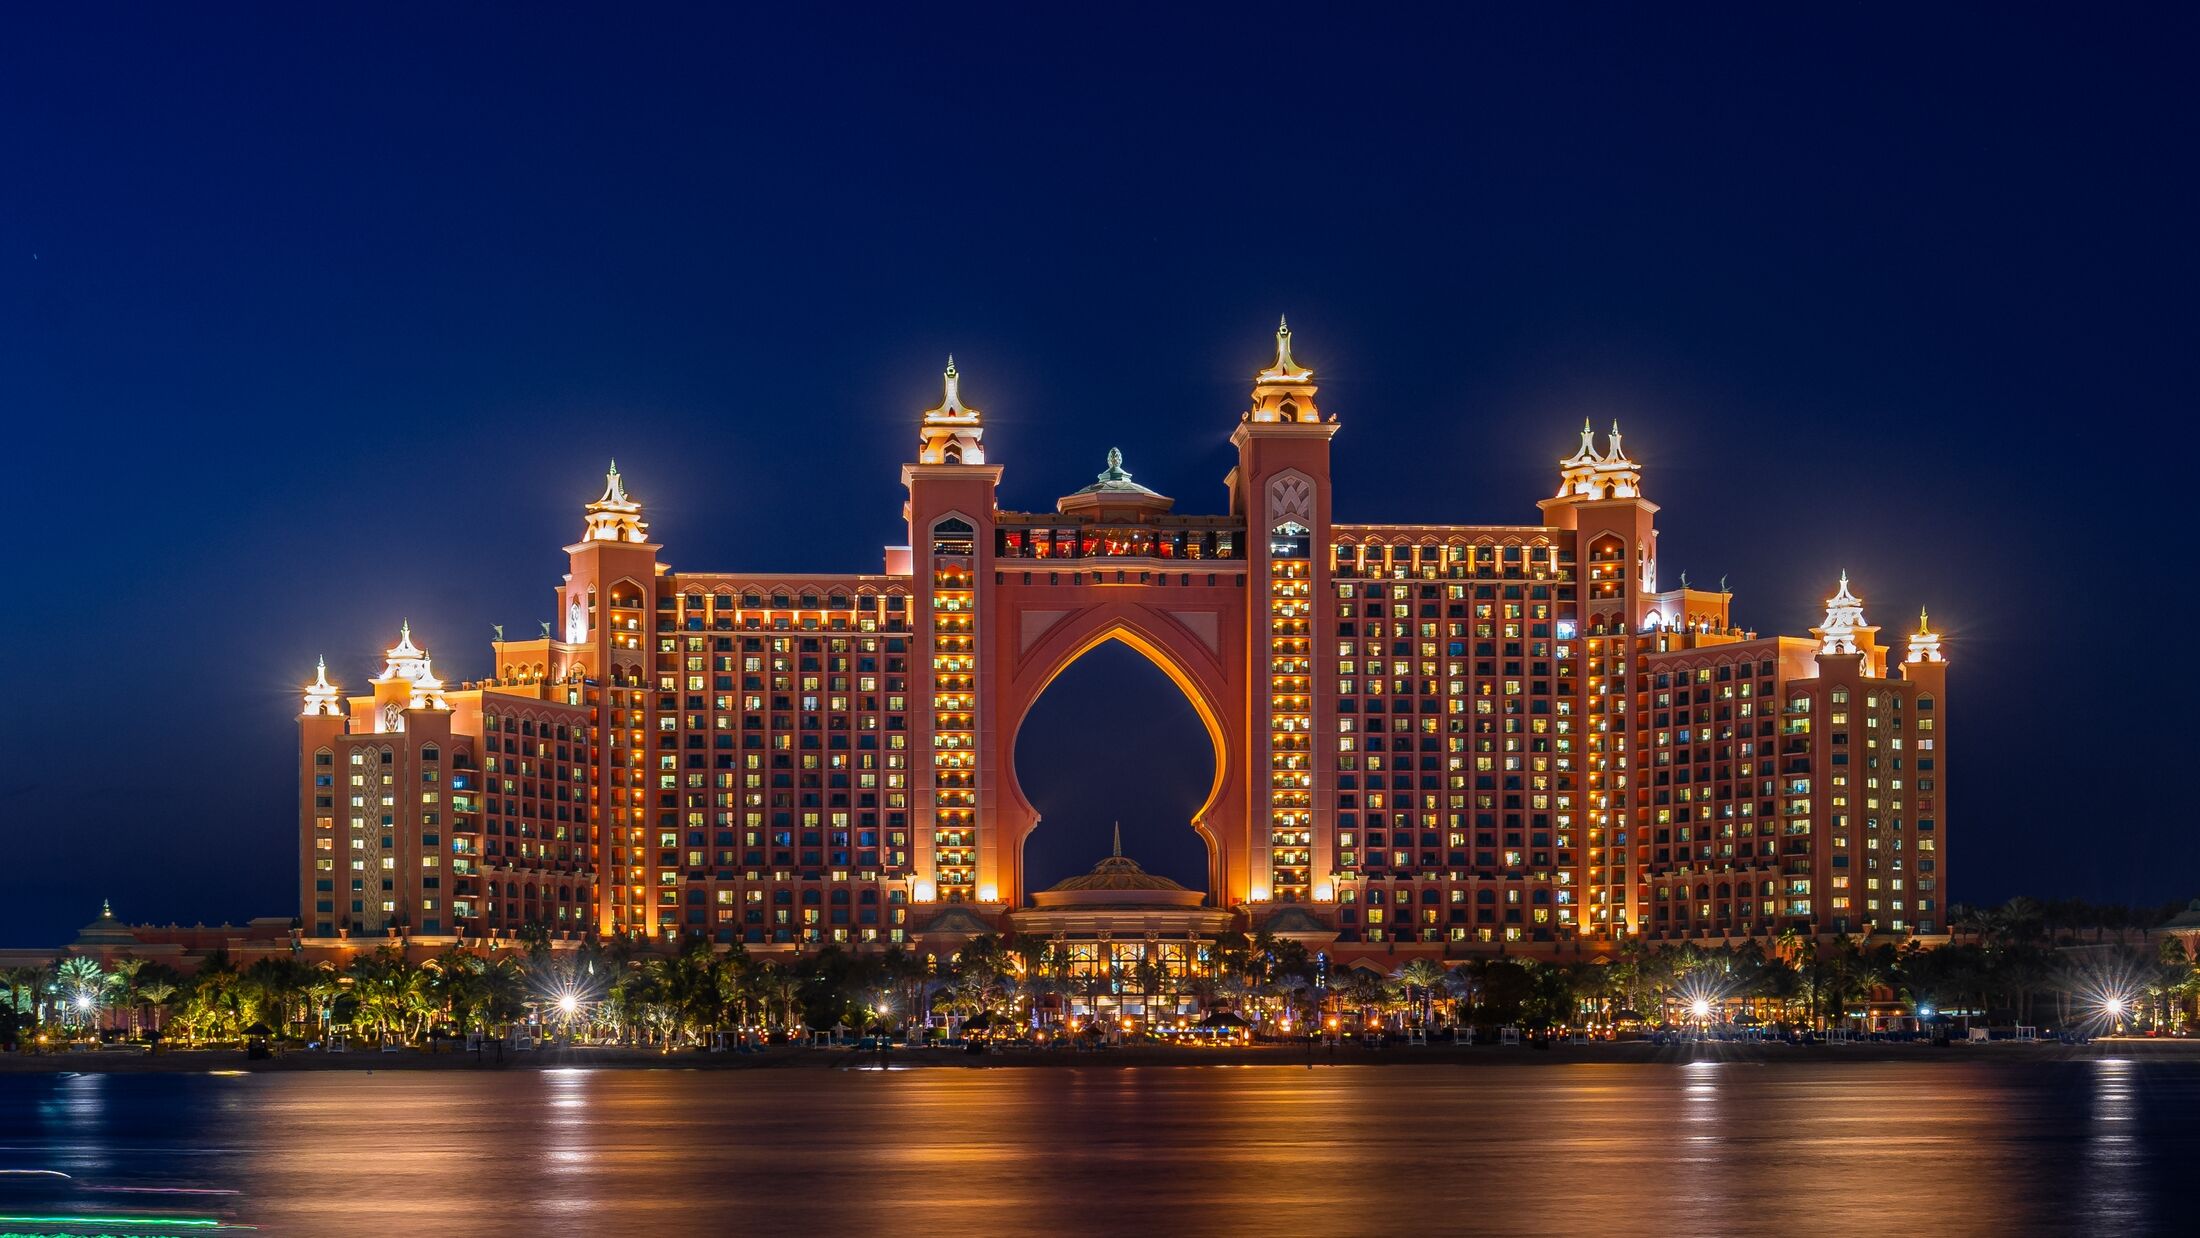 Experience the magic of Dubai's Atlantis hotel at night with our stunning landscape photograph. The iconic hotel, located on the man-made island of Palm Jumeirah